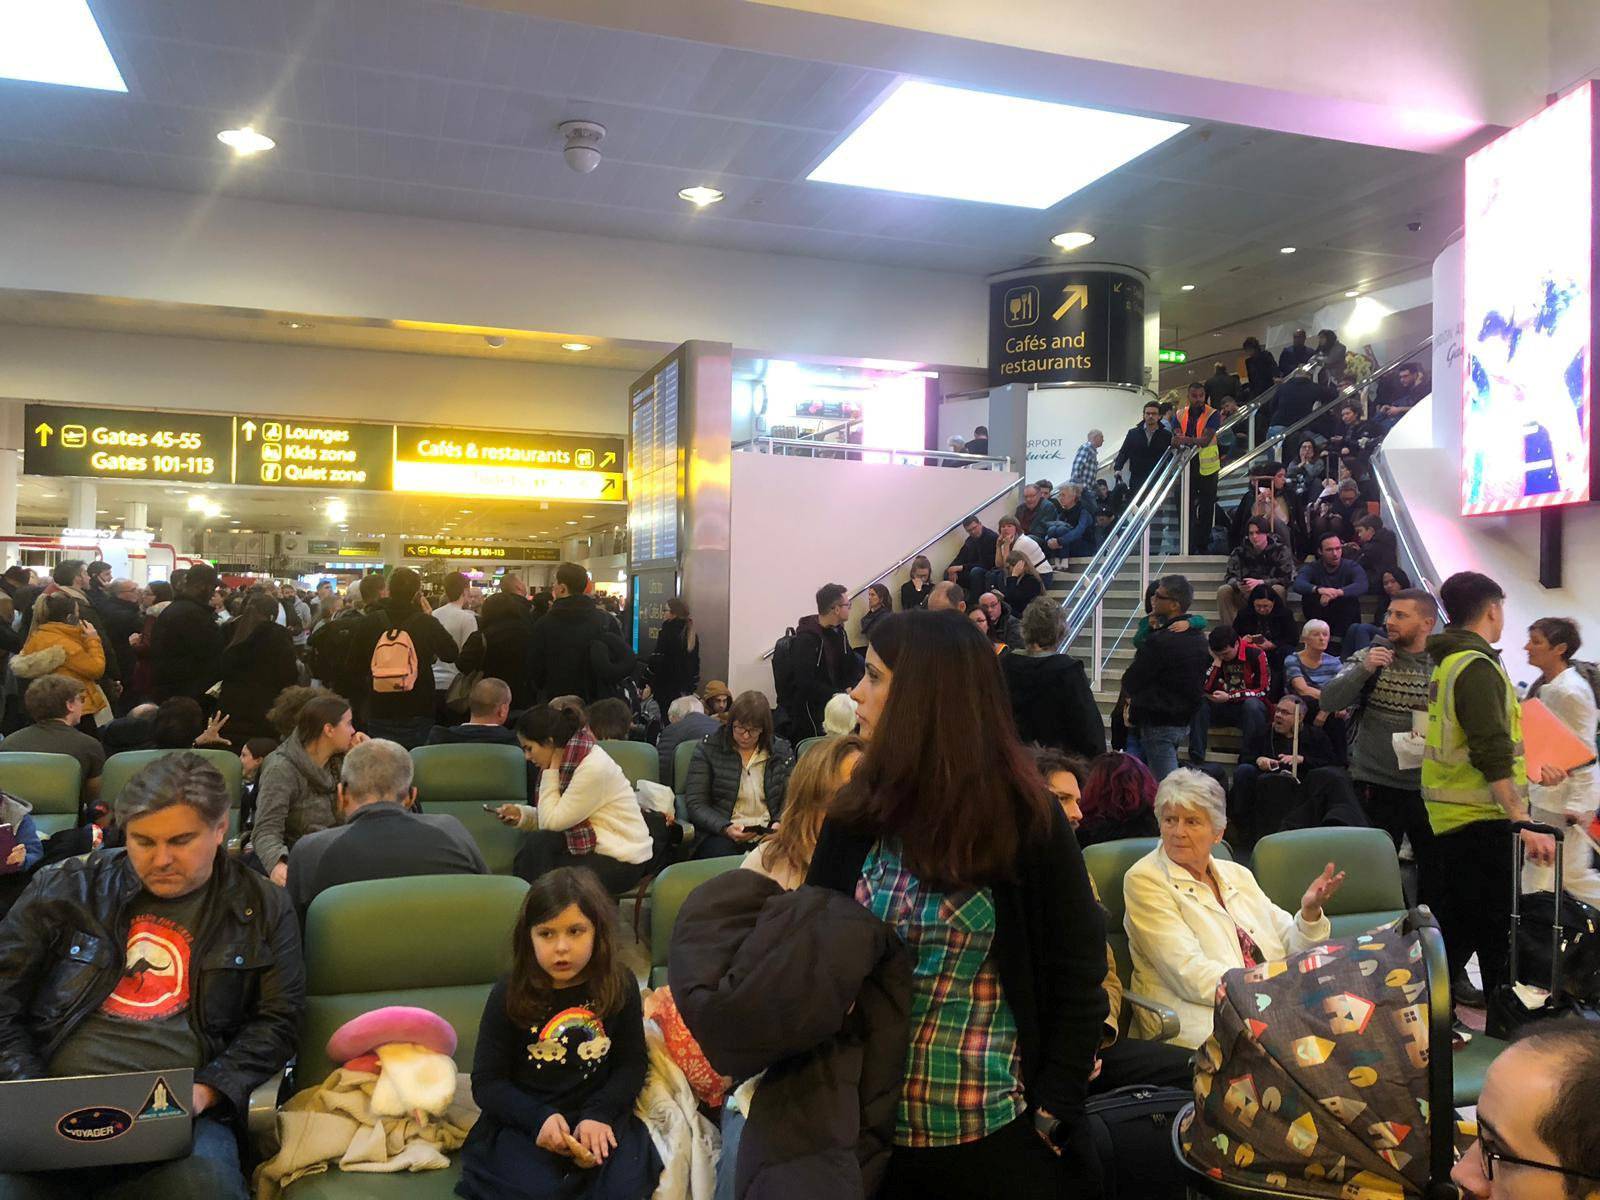 Stranded passengers wait at Gatwick Airport